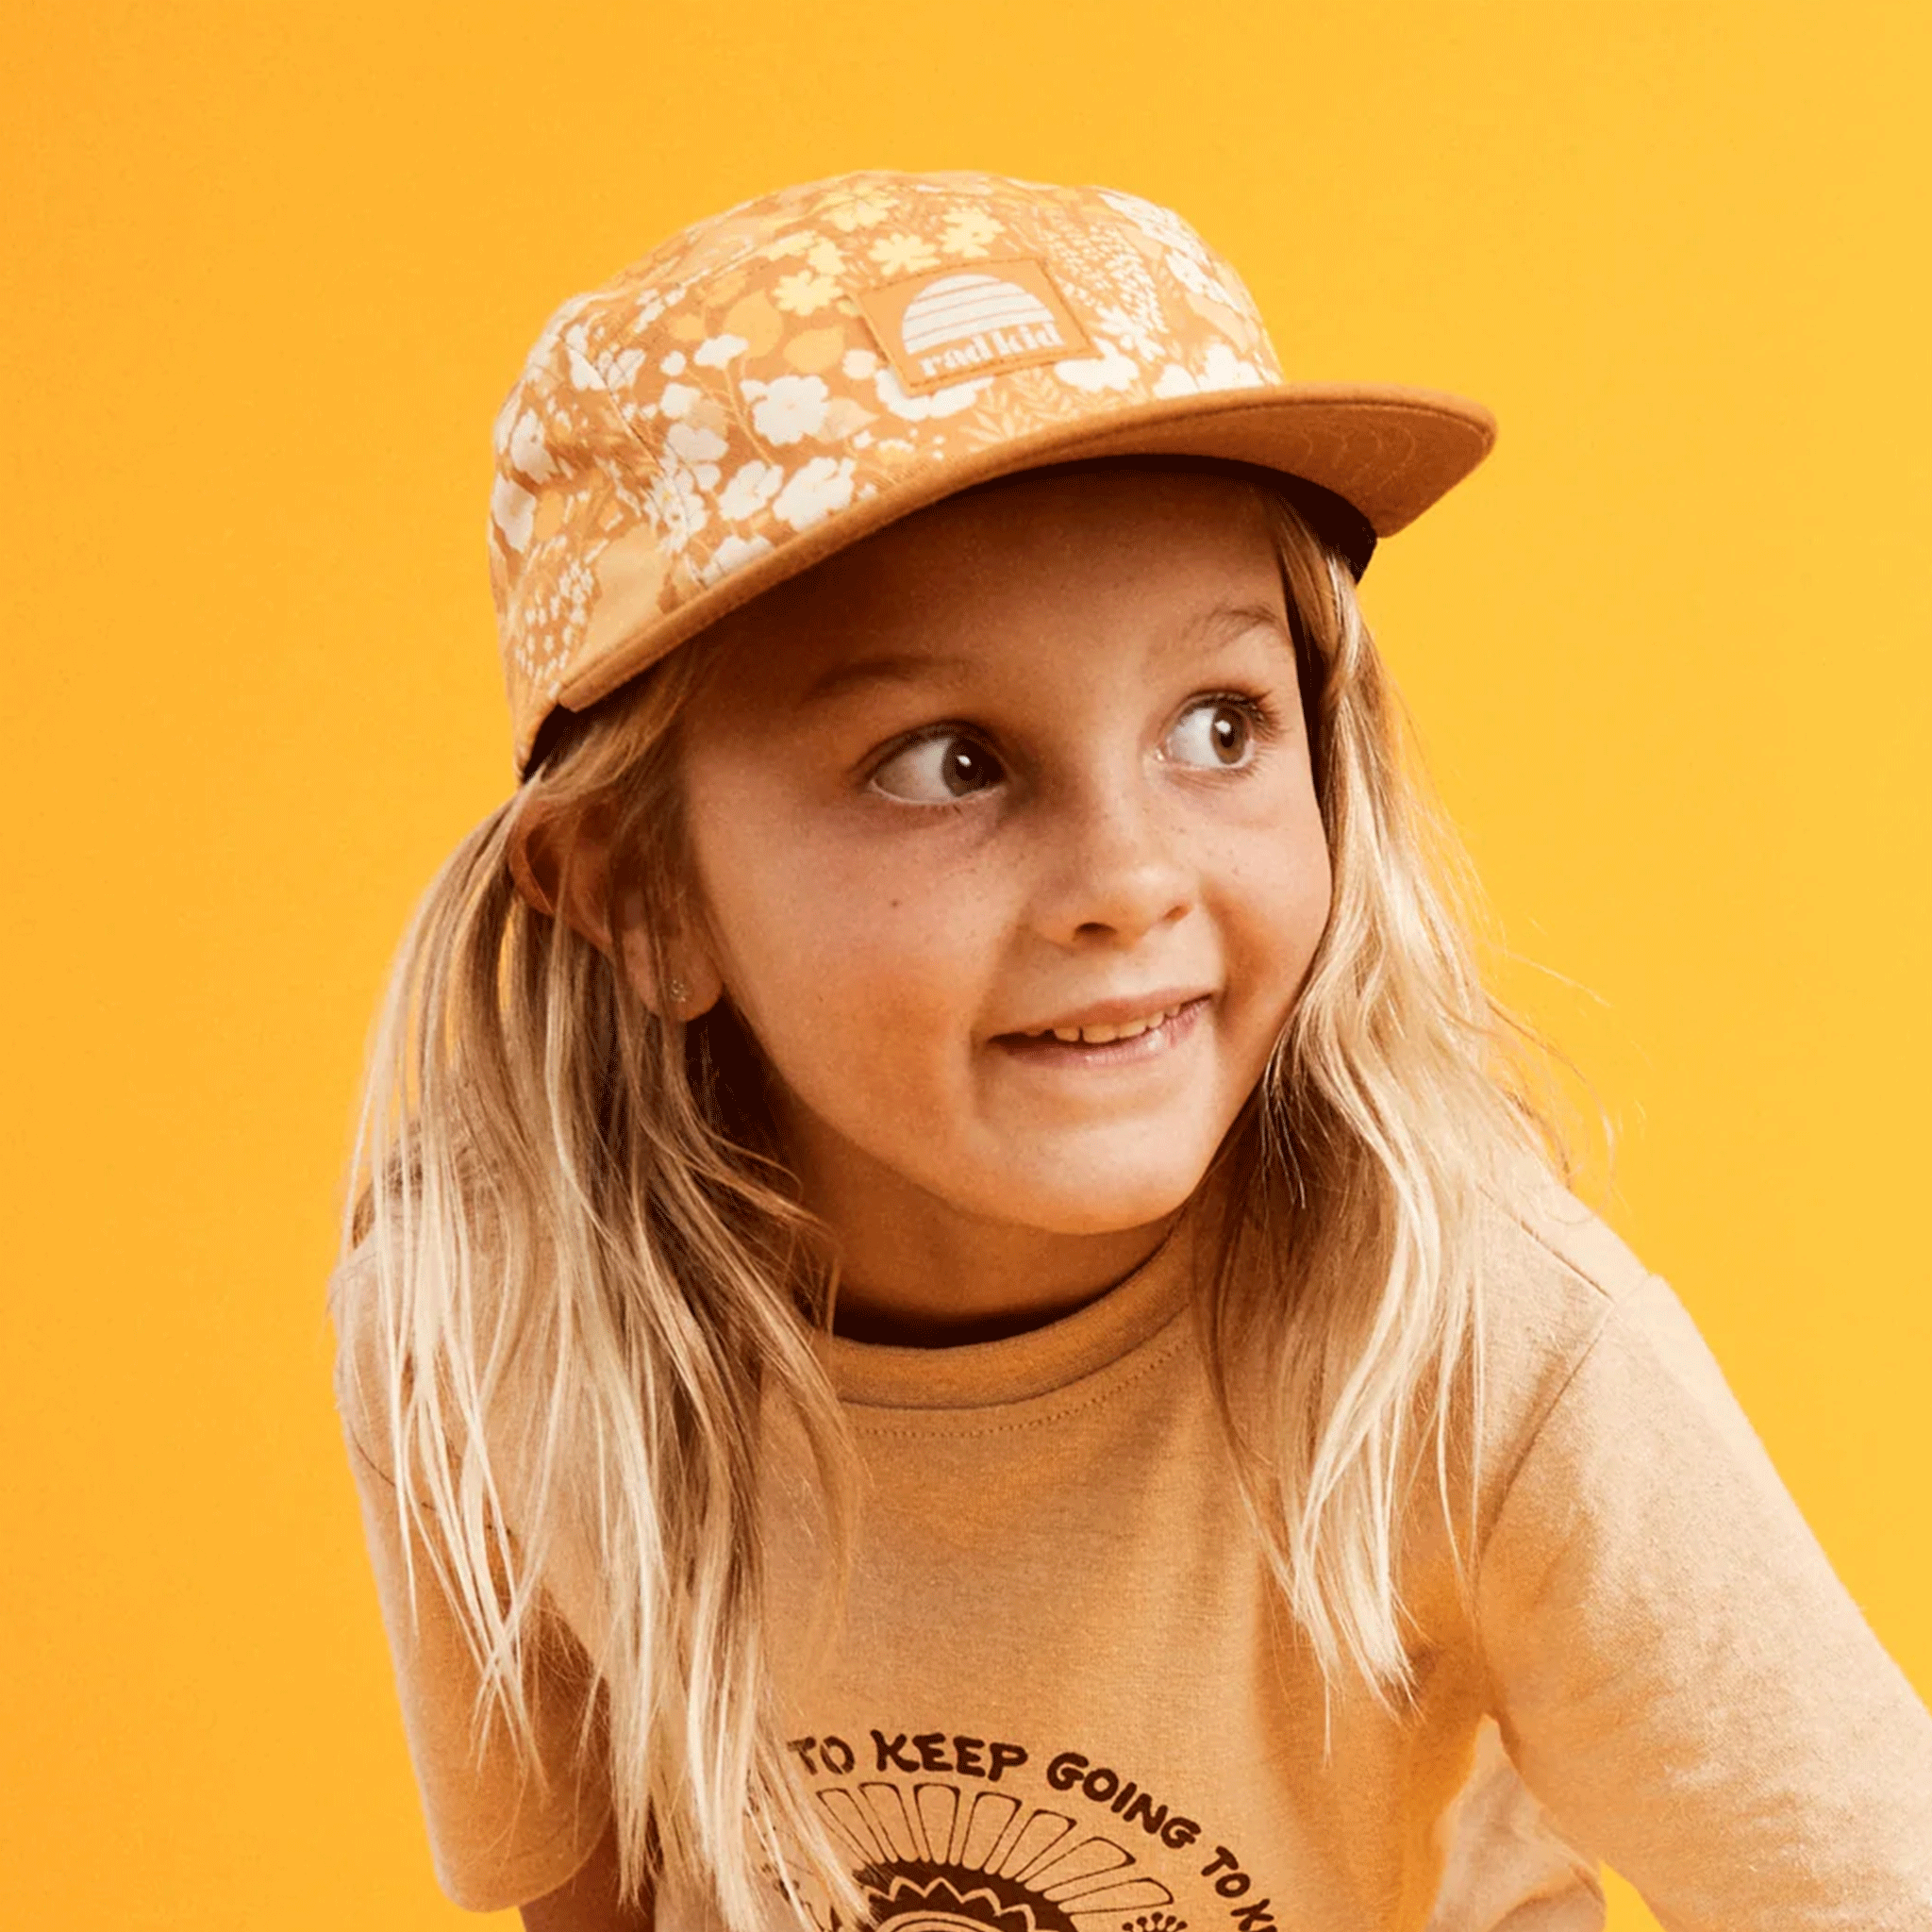 On a yellow background is a children's model wearing a yellow and brown floral print hat with a square label on the front that reads, "rad kid".